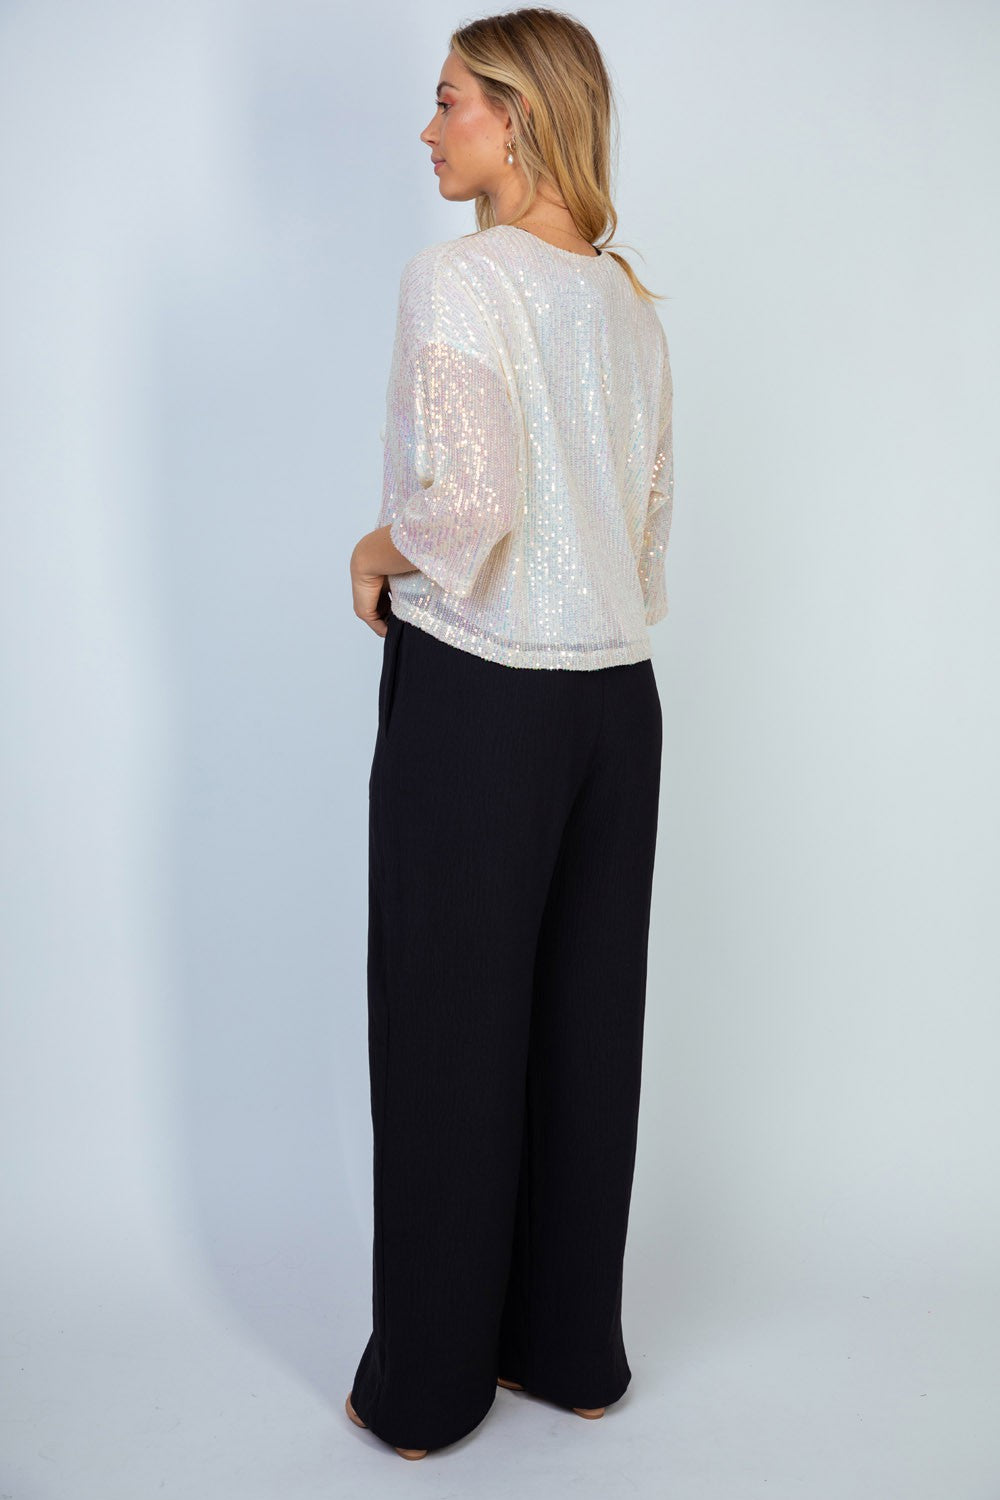 Here For The Party Top - Nude sequin, bolero, shrug, plus size